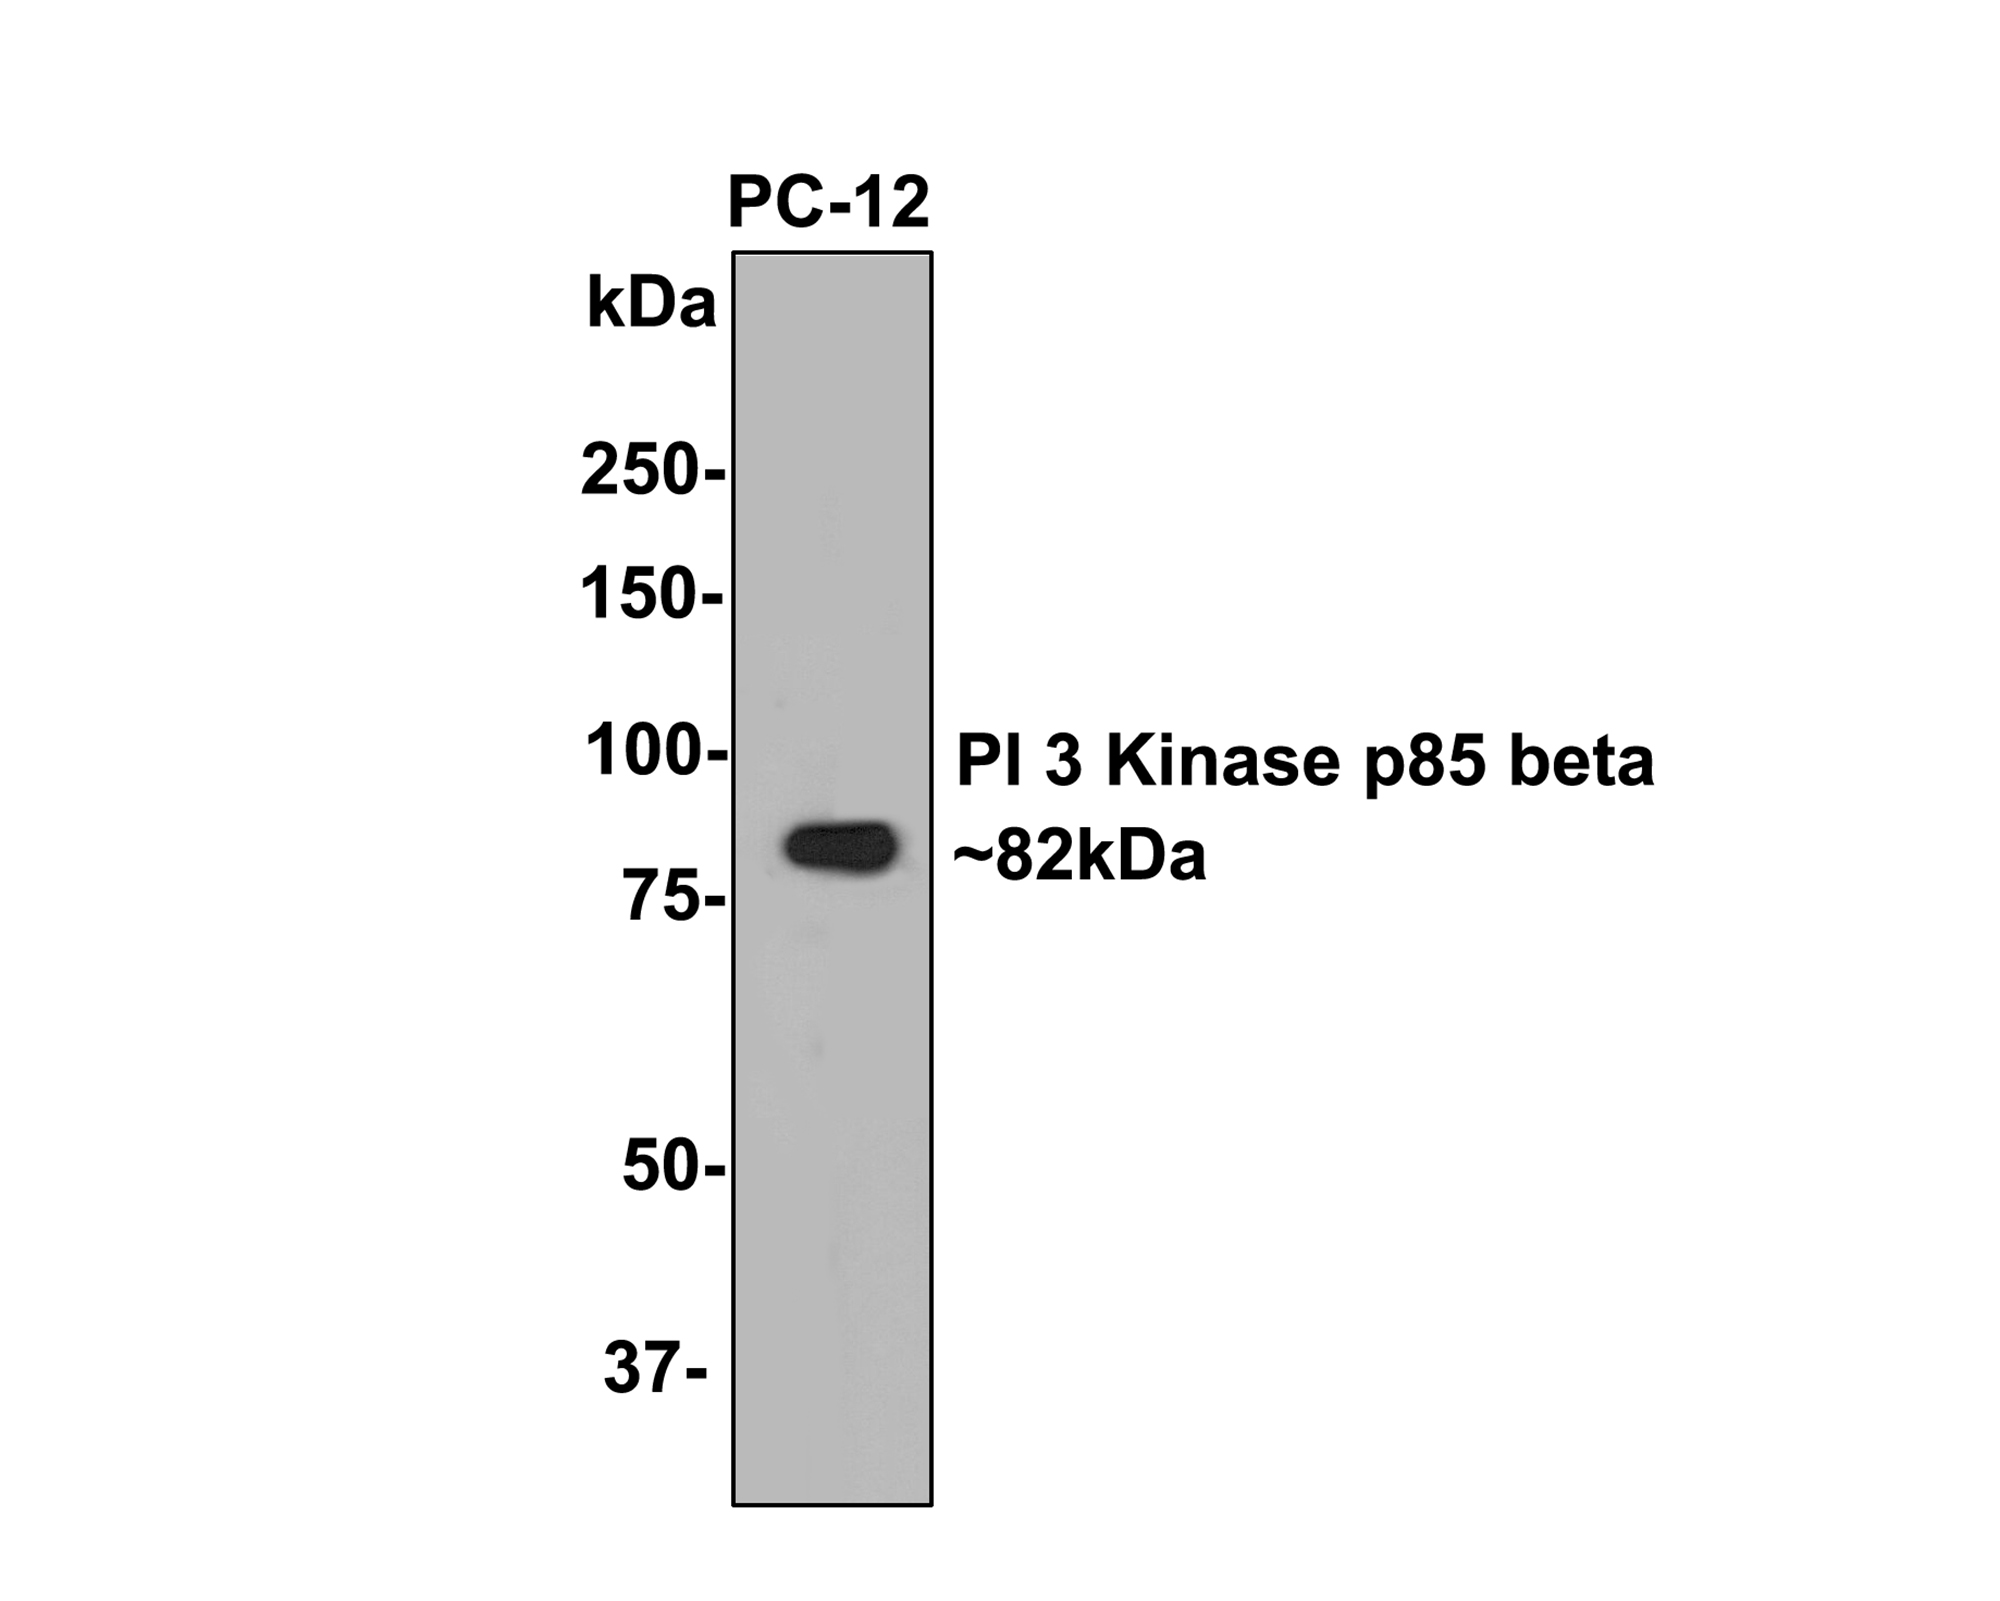 Western blot analysis of PI 3 Kinase p85 beta on PC-12 cell lysates with Rabbit anti-PI 3 Kinase p85 beta antibody (ET1609-30) at 1/500 dilution.<br />
<br />
Lysates/proteins at 10 µg/Lane.<br />
<br />
Predicted band size: 82 kDa<br />
Observed band size: 82 kDa<br />
<br />
Exposure time: 2 minutes;<br />
<br />
8% SDS-PAGE gel.<br />
<br />
Proteins were transferred to a PVDF membrane and blocked with 5% NFDM/TBST for 1 hour at room temperature. The primary antibody (ET1609-30) at 1/500 dilution was used in 5% NFDM/TBST at room temperature for 2 hours. Goat Anti-Rabbit IgG - HRP Secondary Antibody (HA1001) at 1:300,000 dilution was used for 1 hour at room temperature.